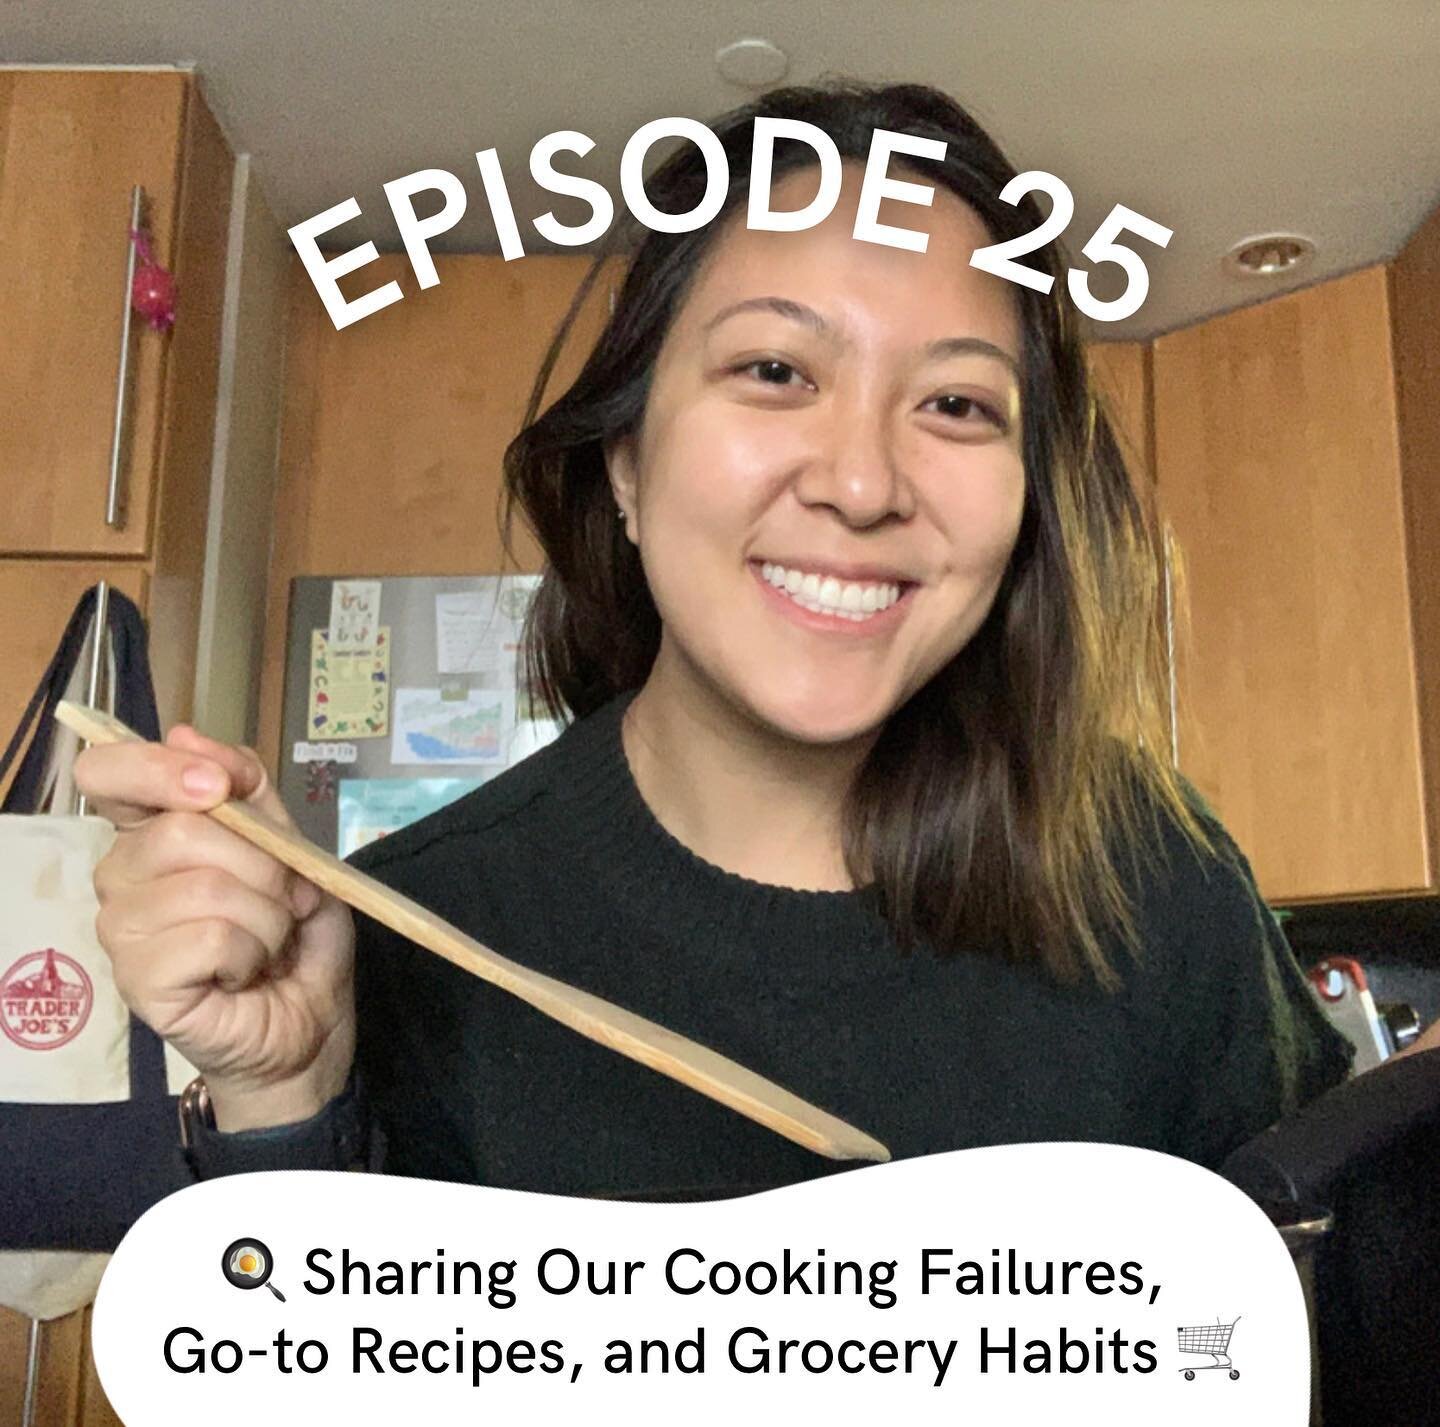 We&rsquo;re back from our short holiday break! Listen to our most recent episode on cooking!

In this episode, we discuss: 
👨&zwj;👩&zwj;👦&zwj;👦 How our family has influenced our cooking habits
❌ Our cooking failures
🎊 Recipes we&rsquo;re looking